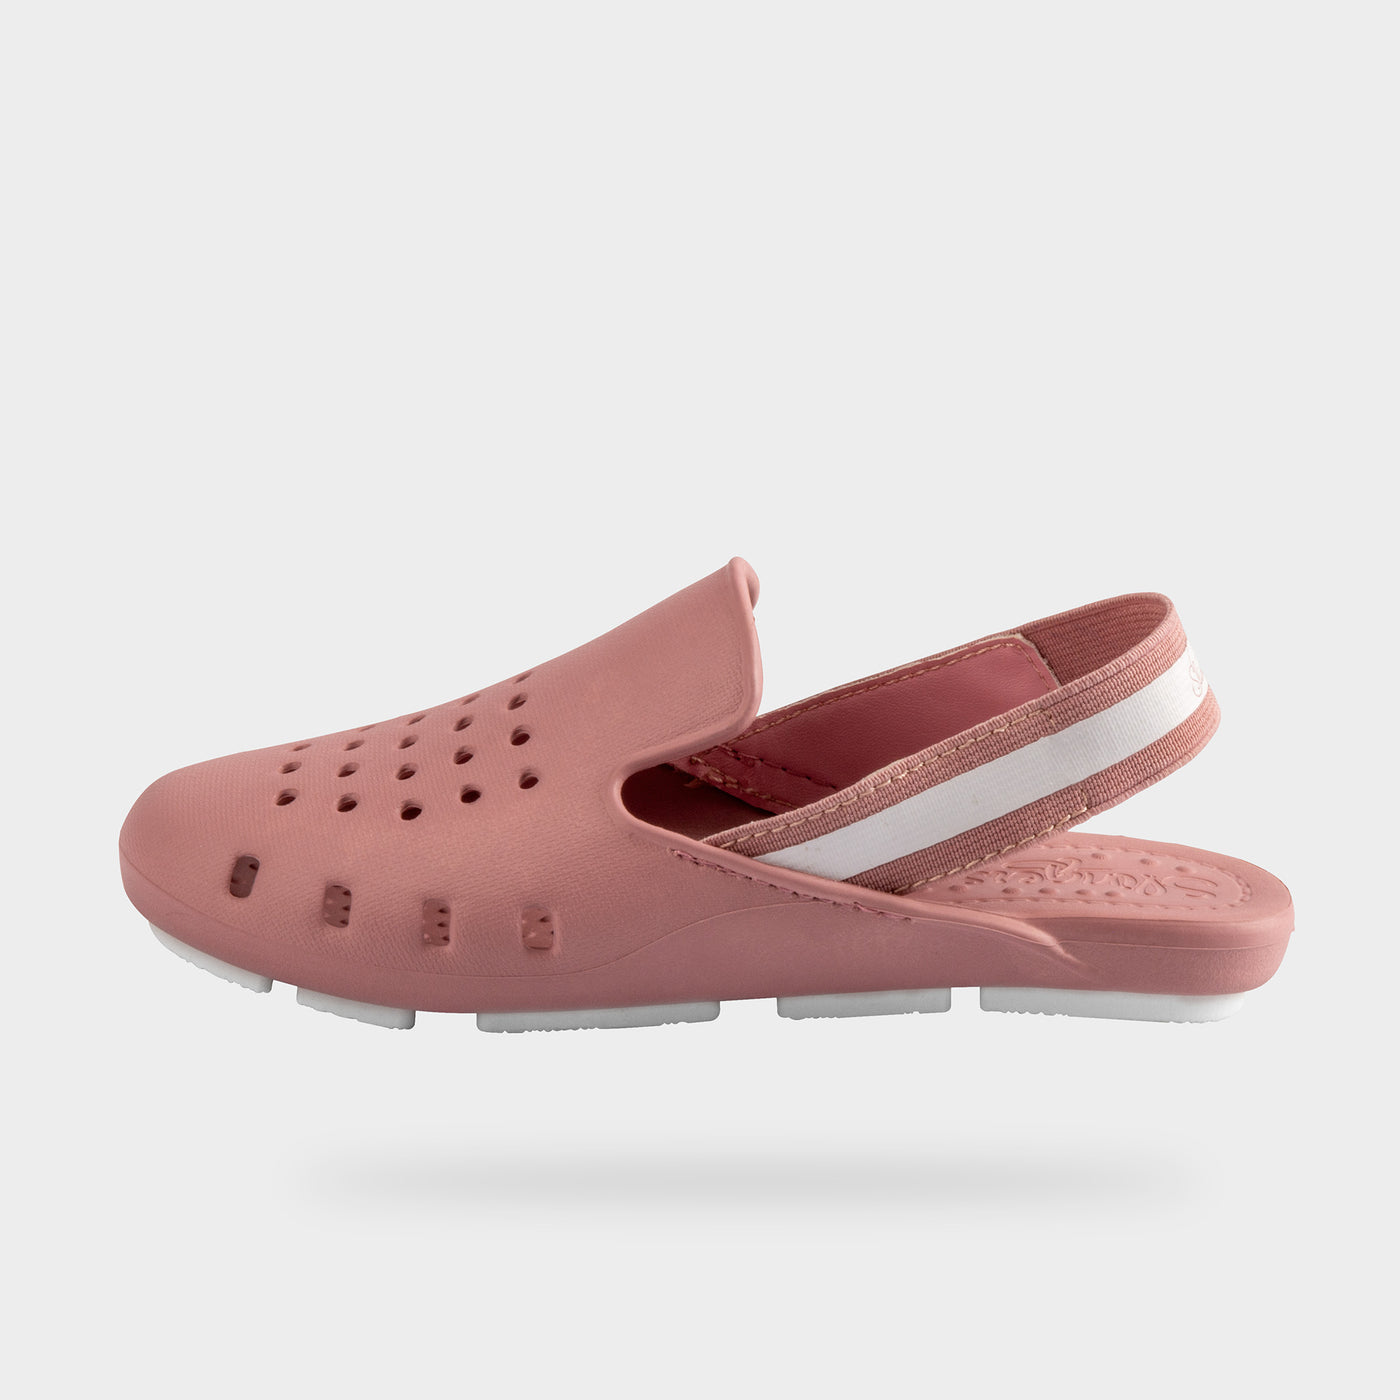 Pink Water shoes | soft as a girls Jelly shoes | Slide sandal slingback